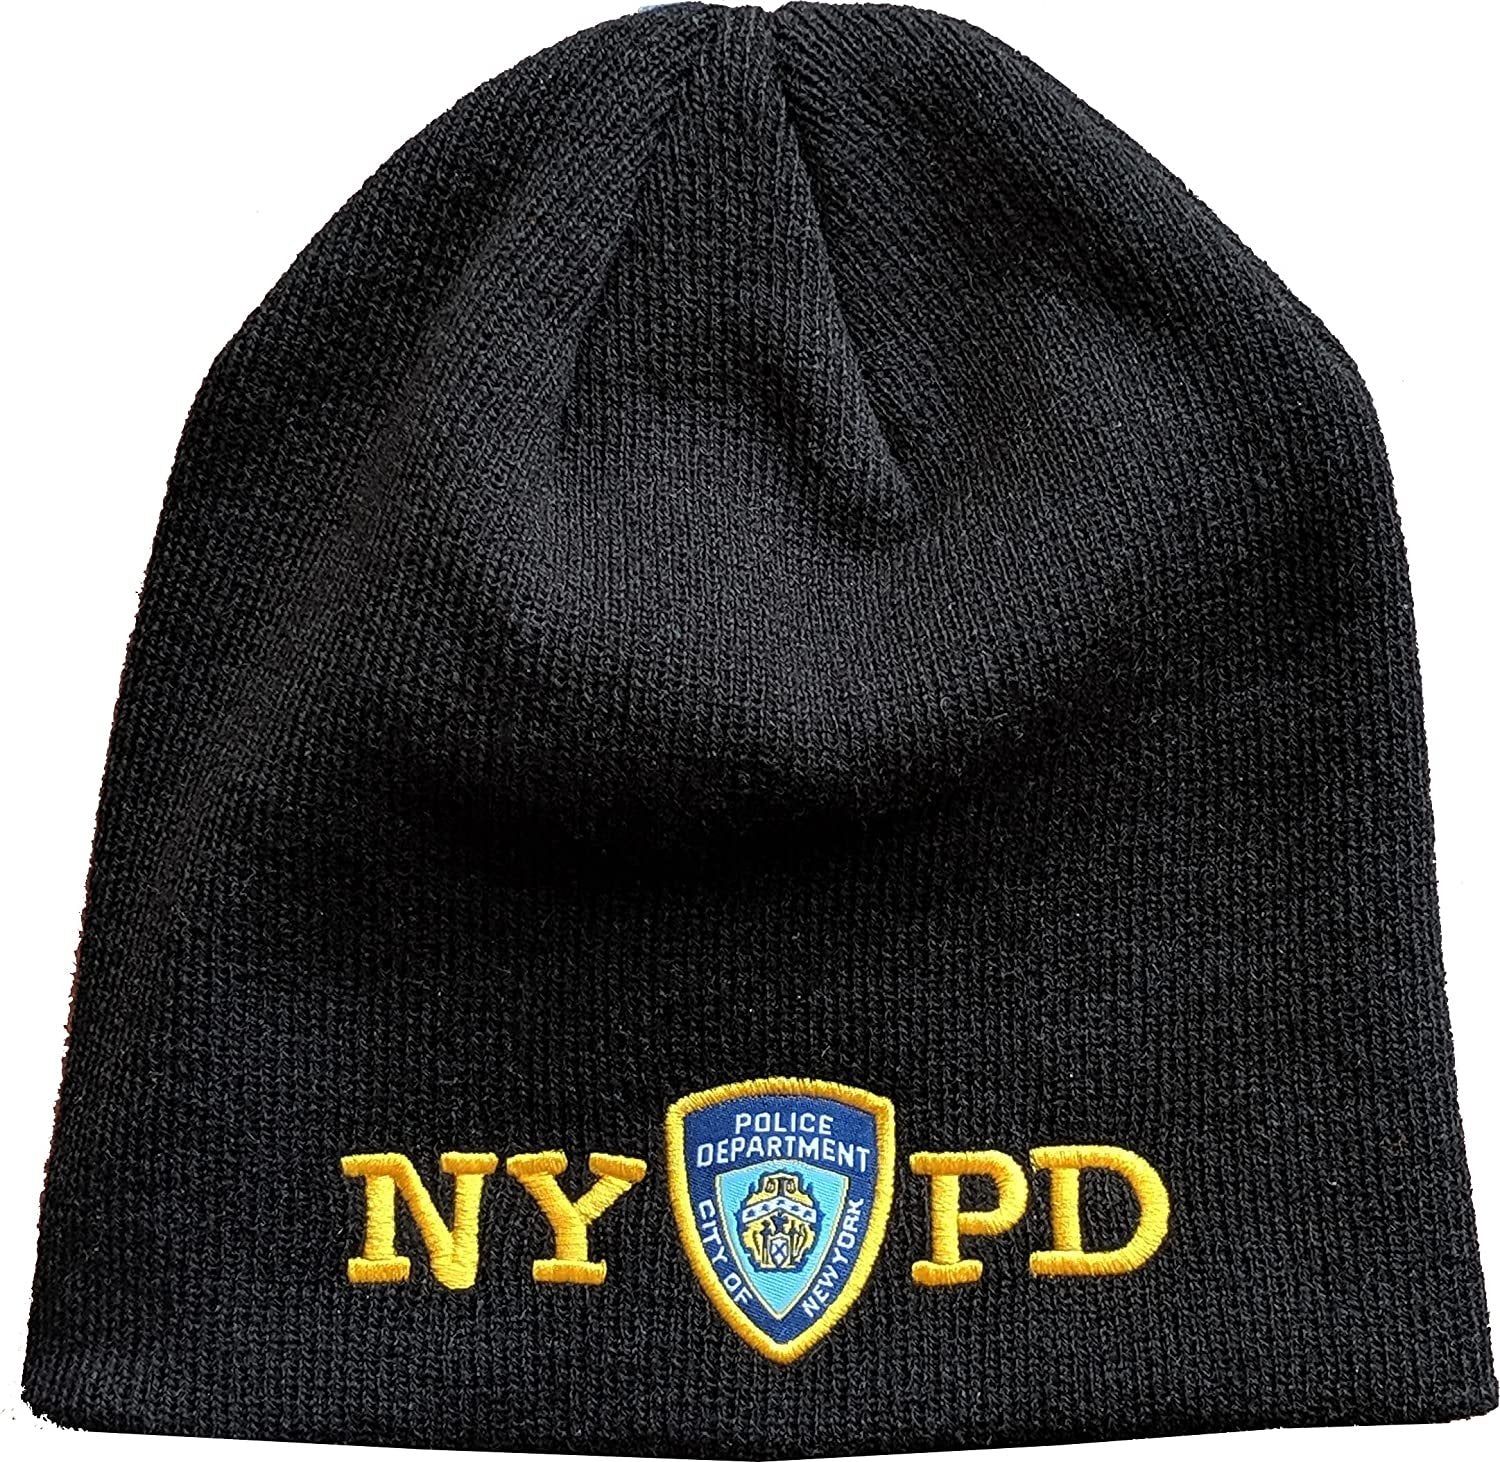 NYPD Beanies Officially Licensed Cold Weather Winter Hats